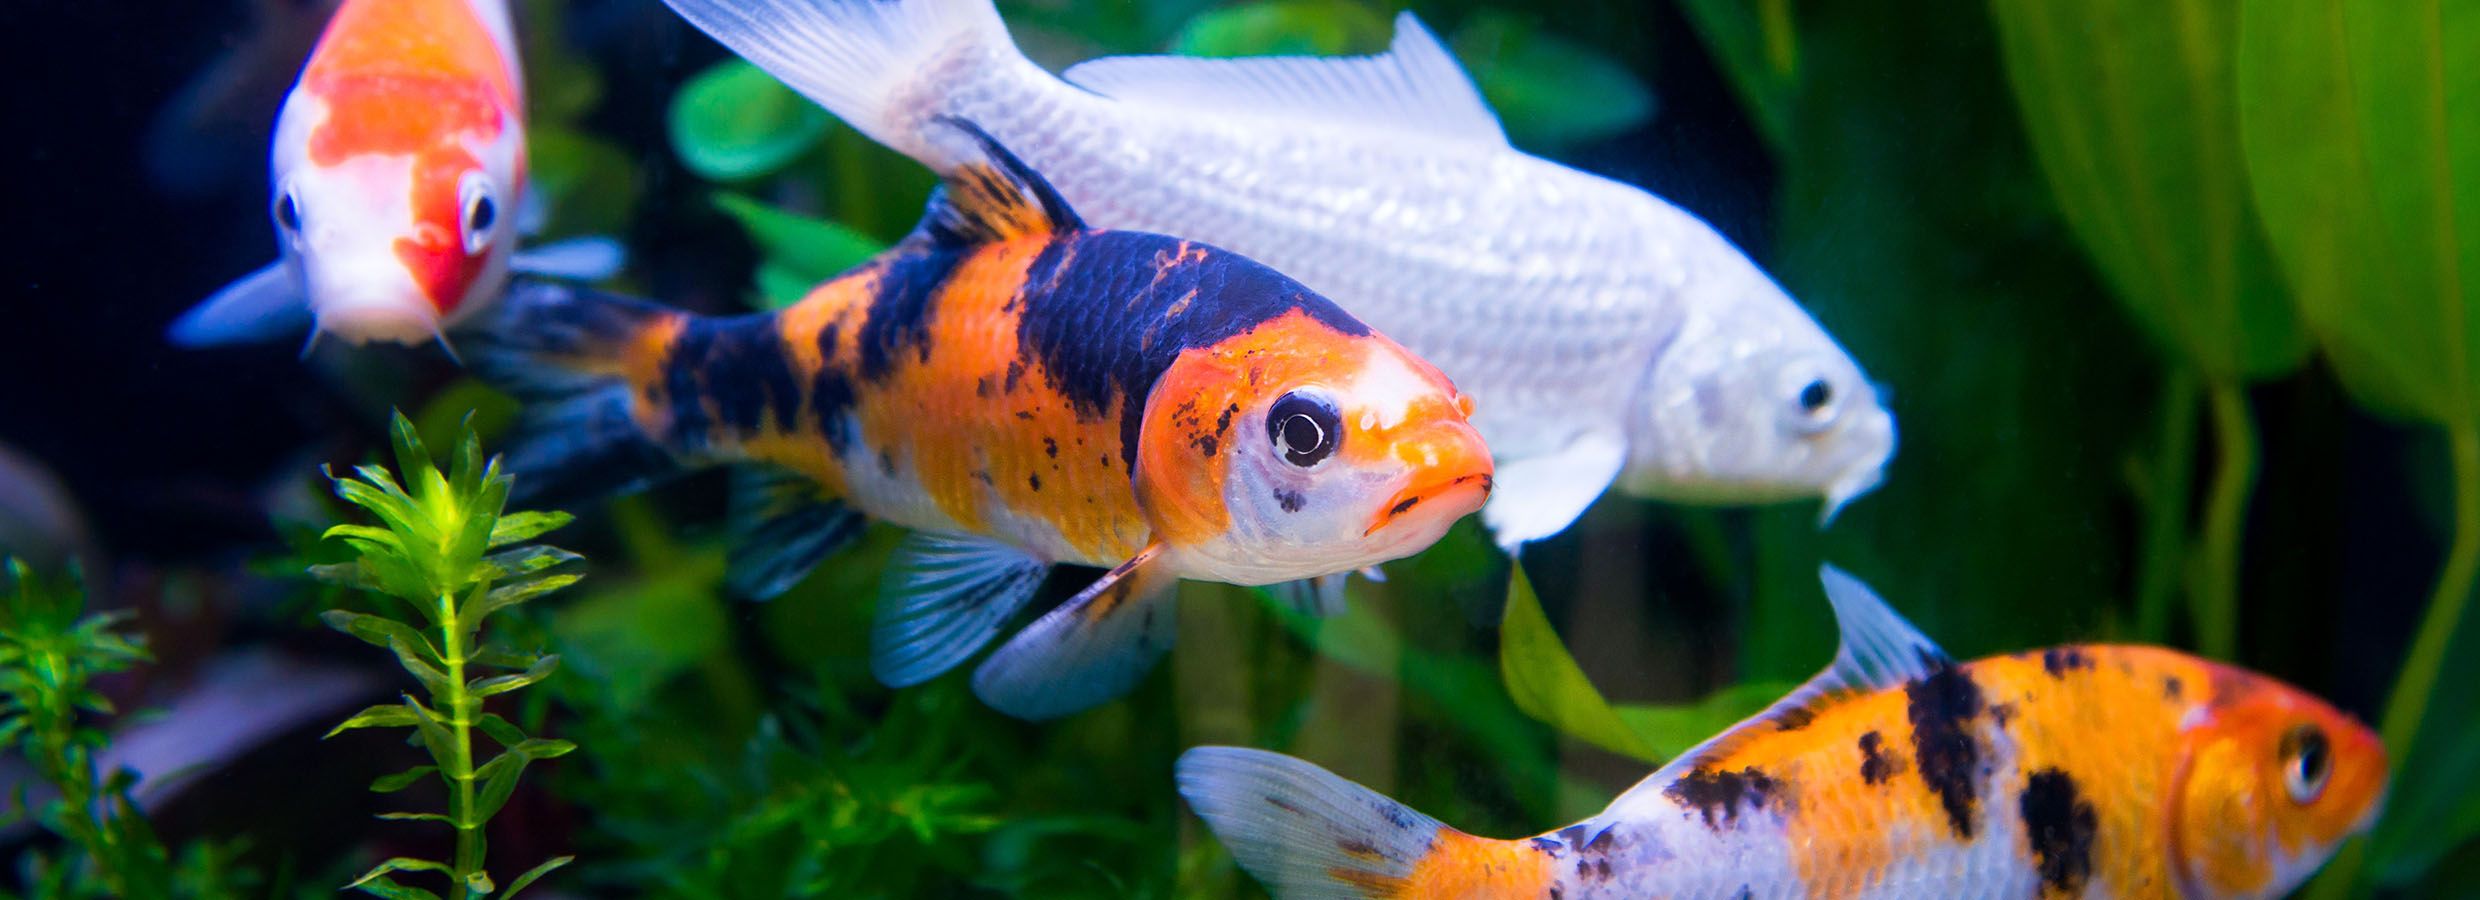 where can i buy live fish near me